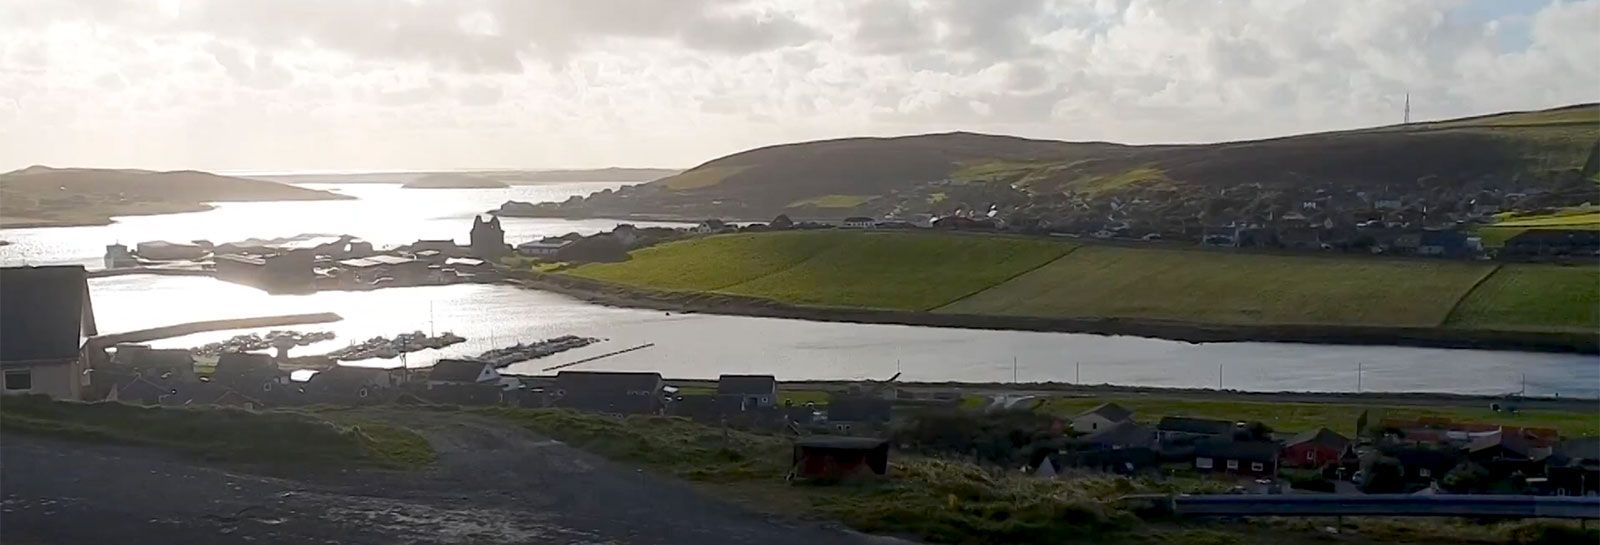 View of the Scalloway landscape banner image